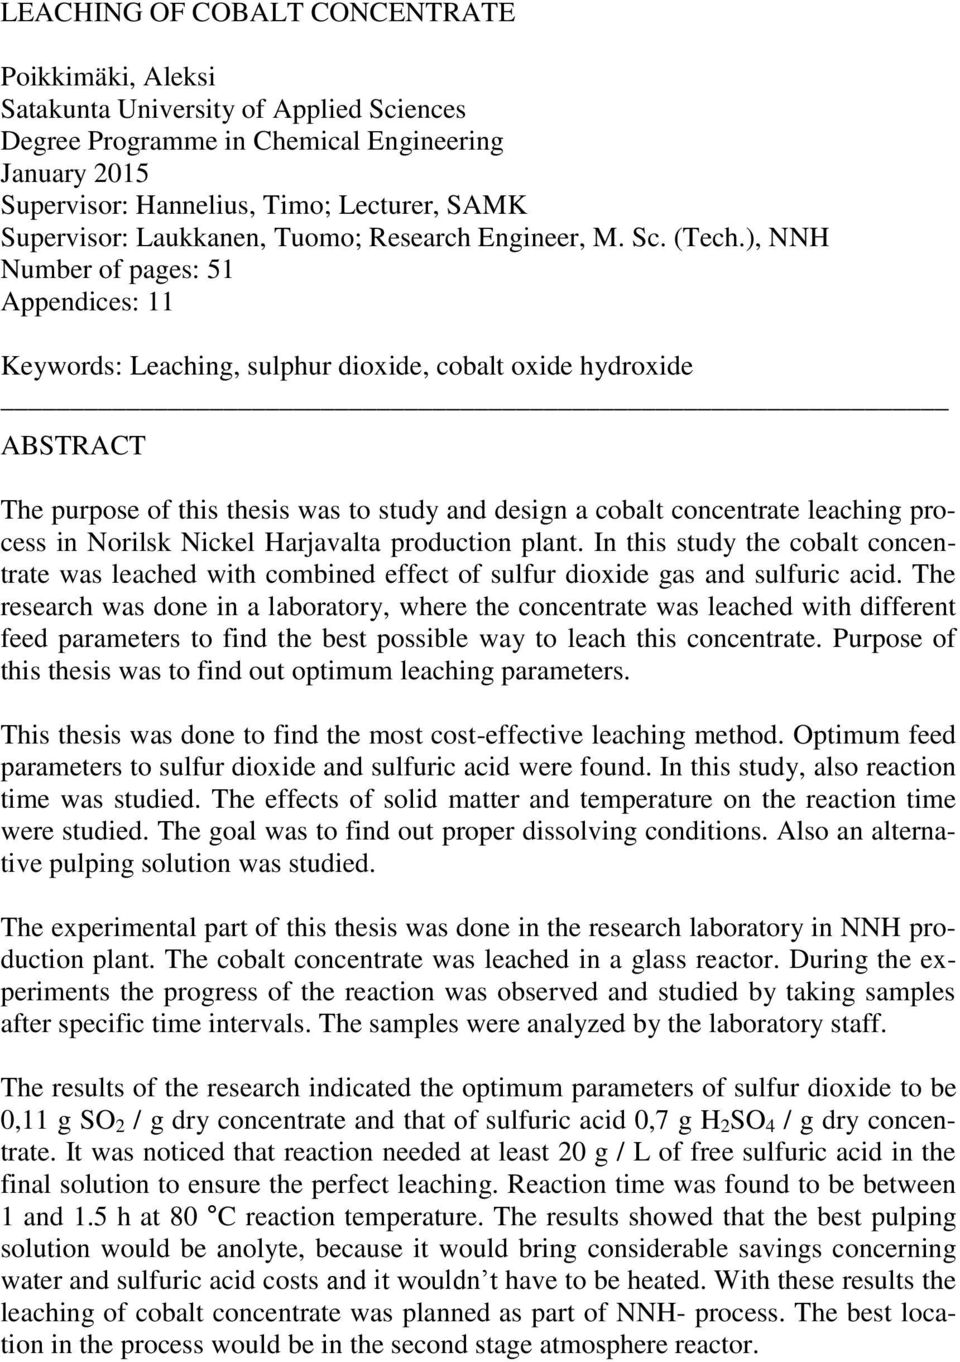 ), NNH Number of pages: 51 Appendices: 11 Keywords: Leaching, sulphur dioxide, cobalt oxide hydroxide ABSTRACT The purpose of this thesis was to study and design a cobalt concentrate leaching process